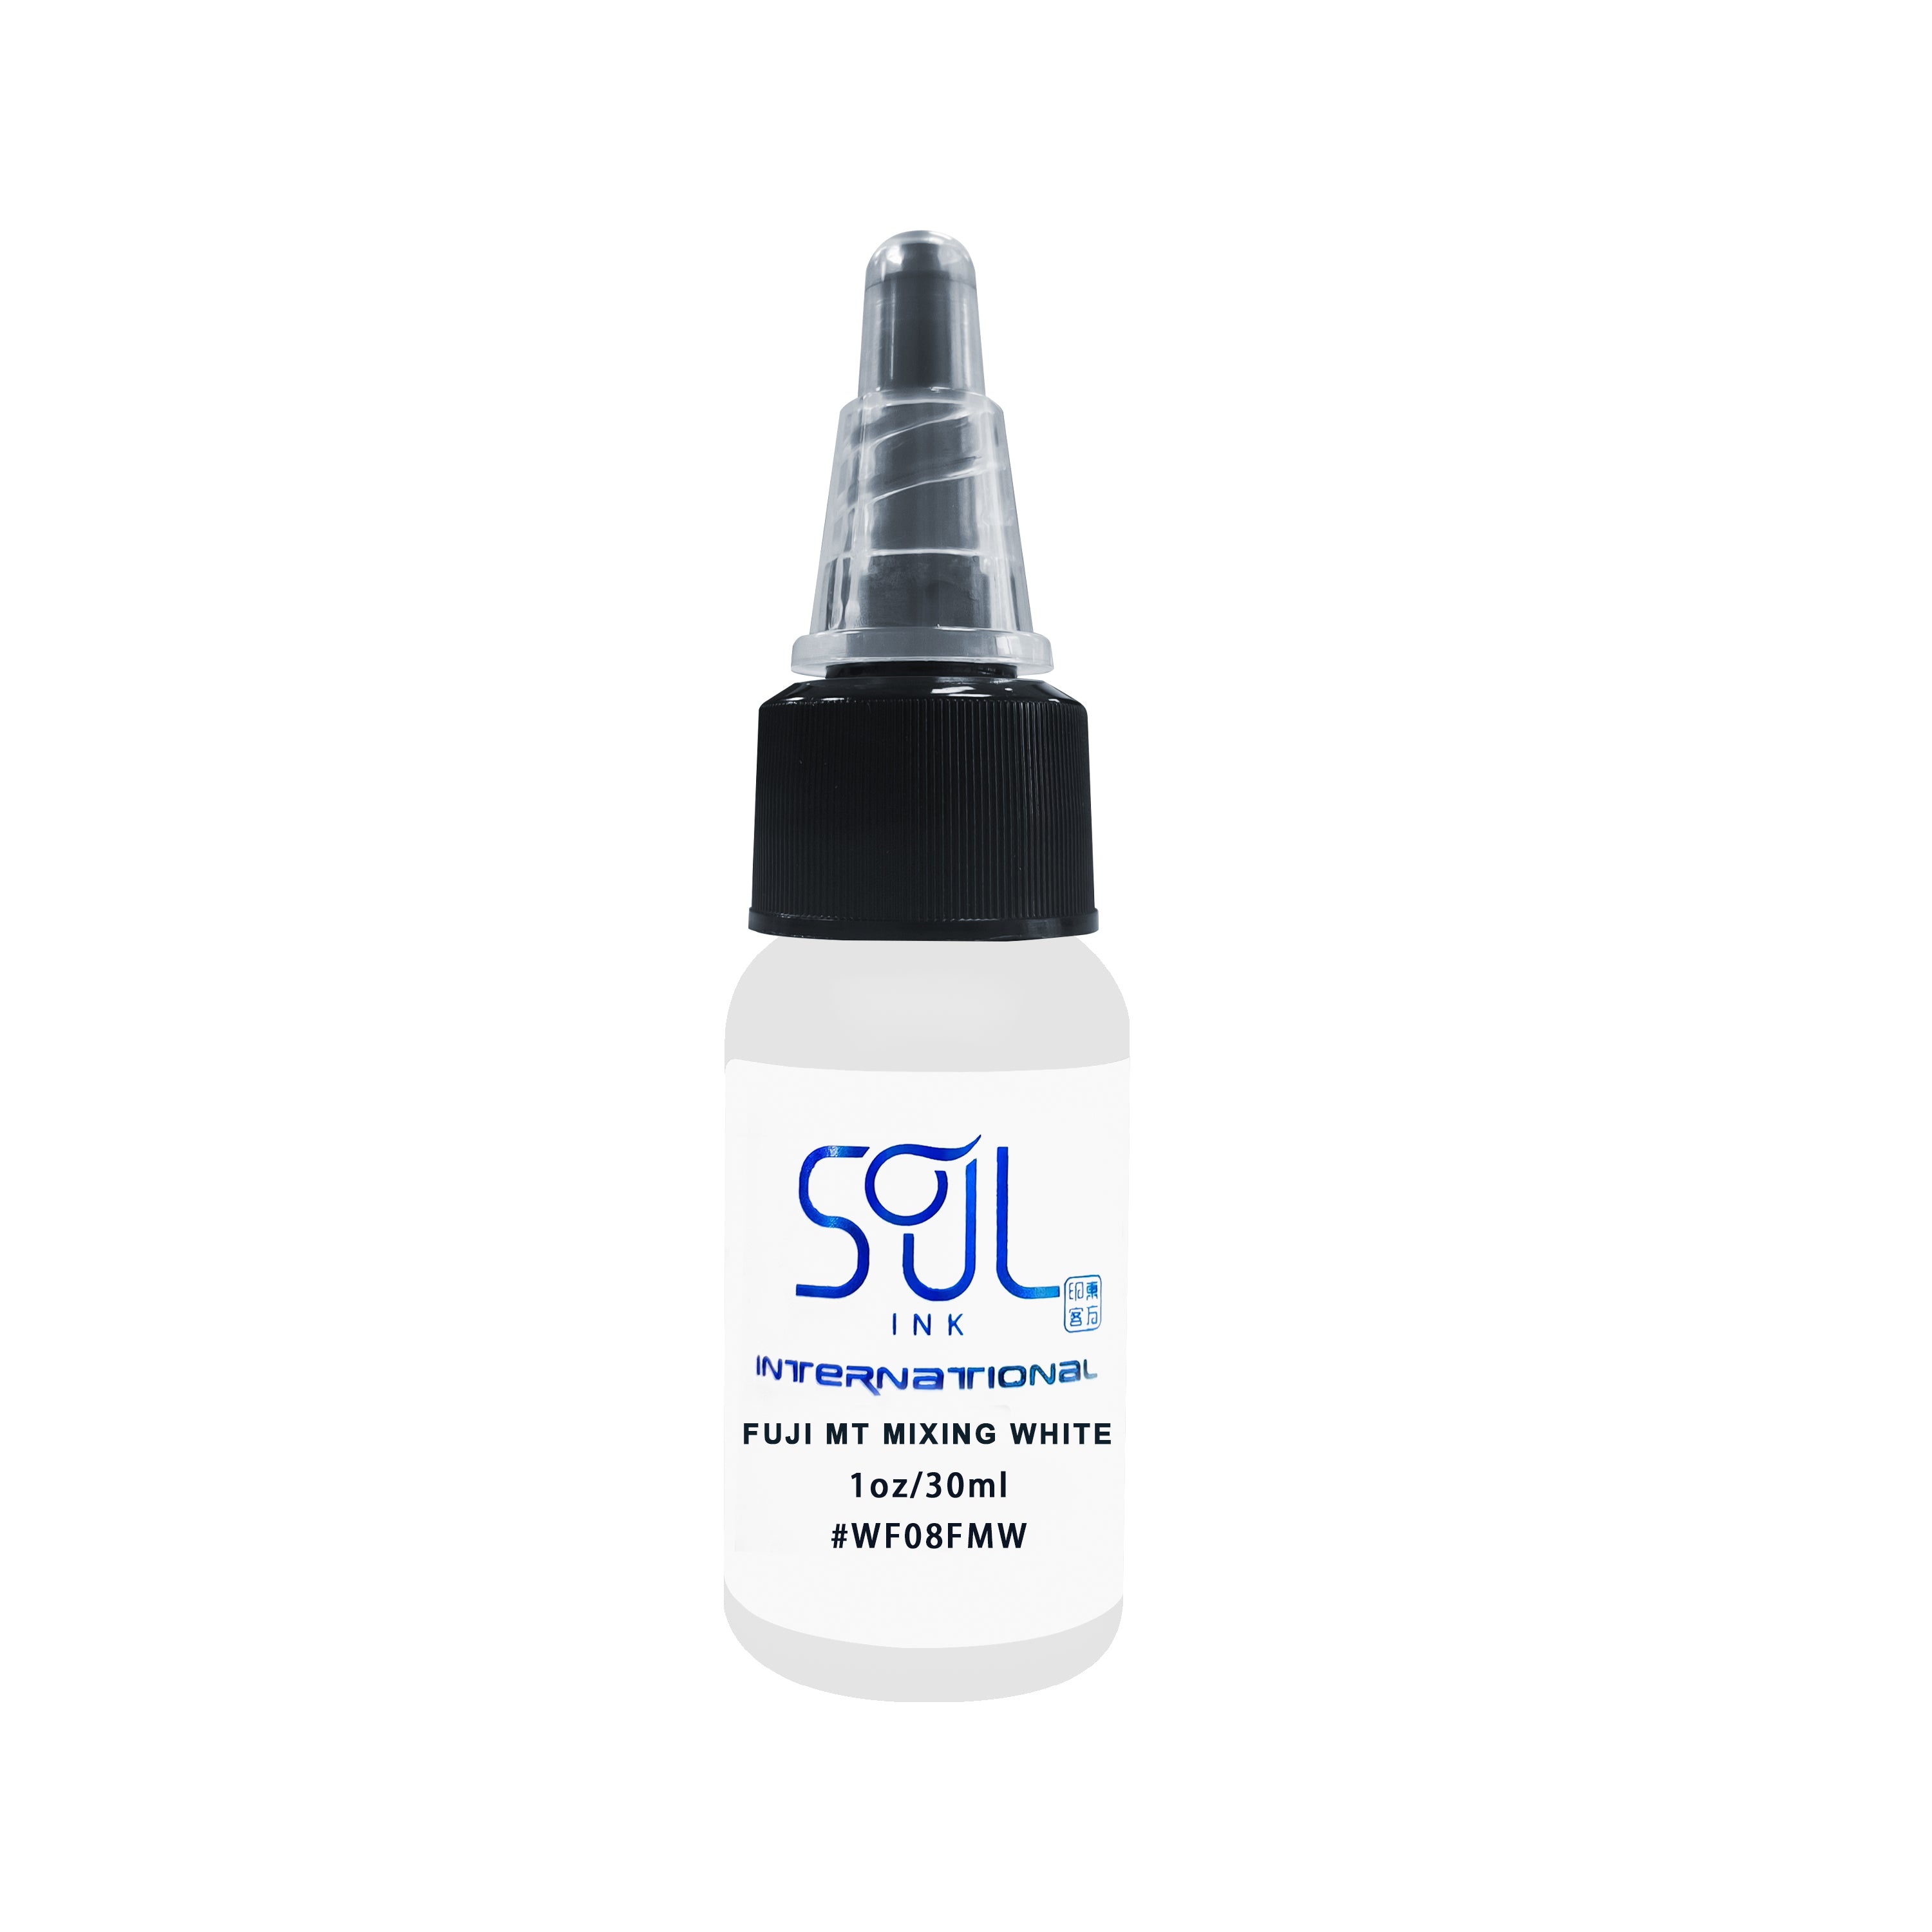 Photograph of a bottle of 'Soul Ink' brand fuji mt mixing white ink. The label prominently displays the brand name 'Soul Ink' in stylish blue typography against a white background. The fuji mt mixing white 30 ml bottle with a white label featuring the brands name 'Soul Ink'.